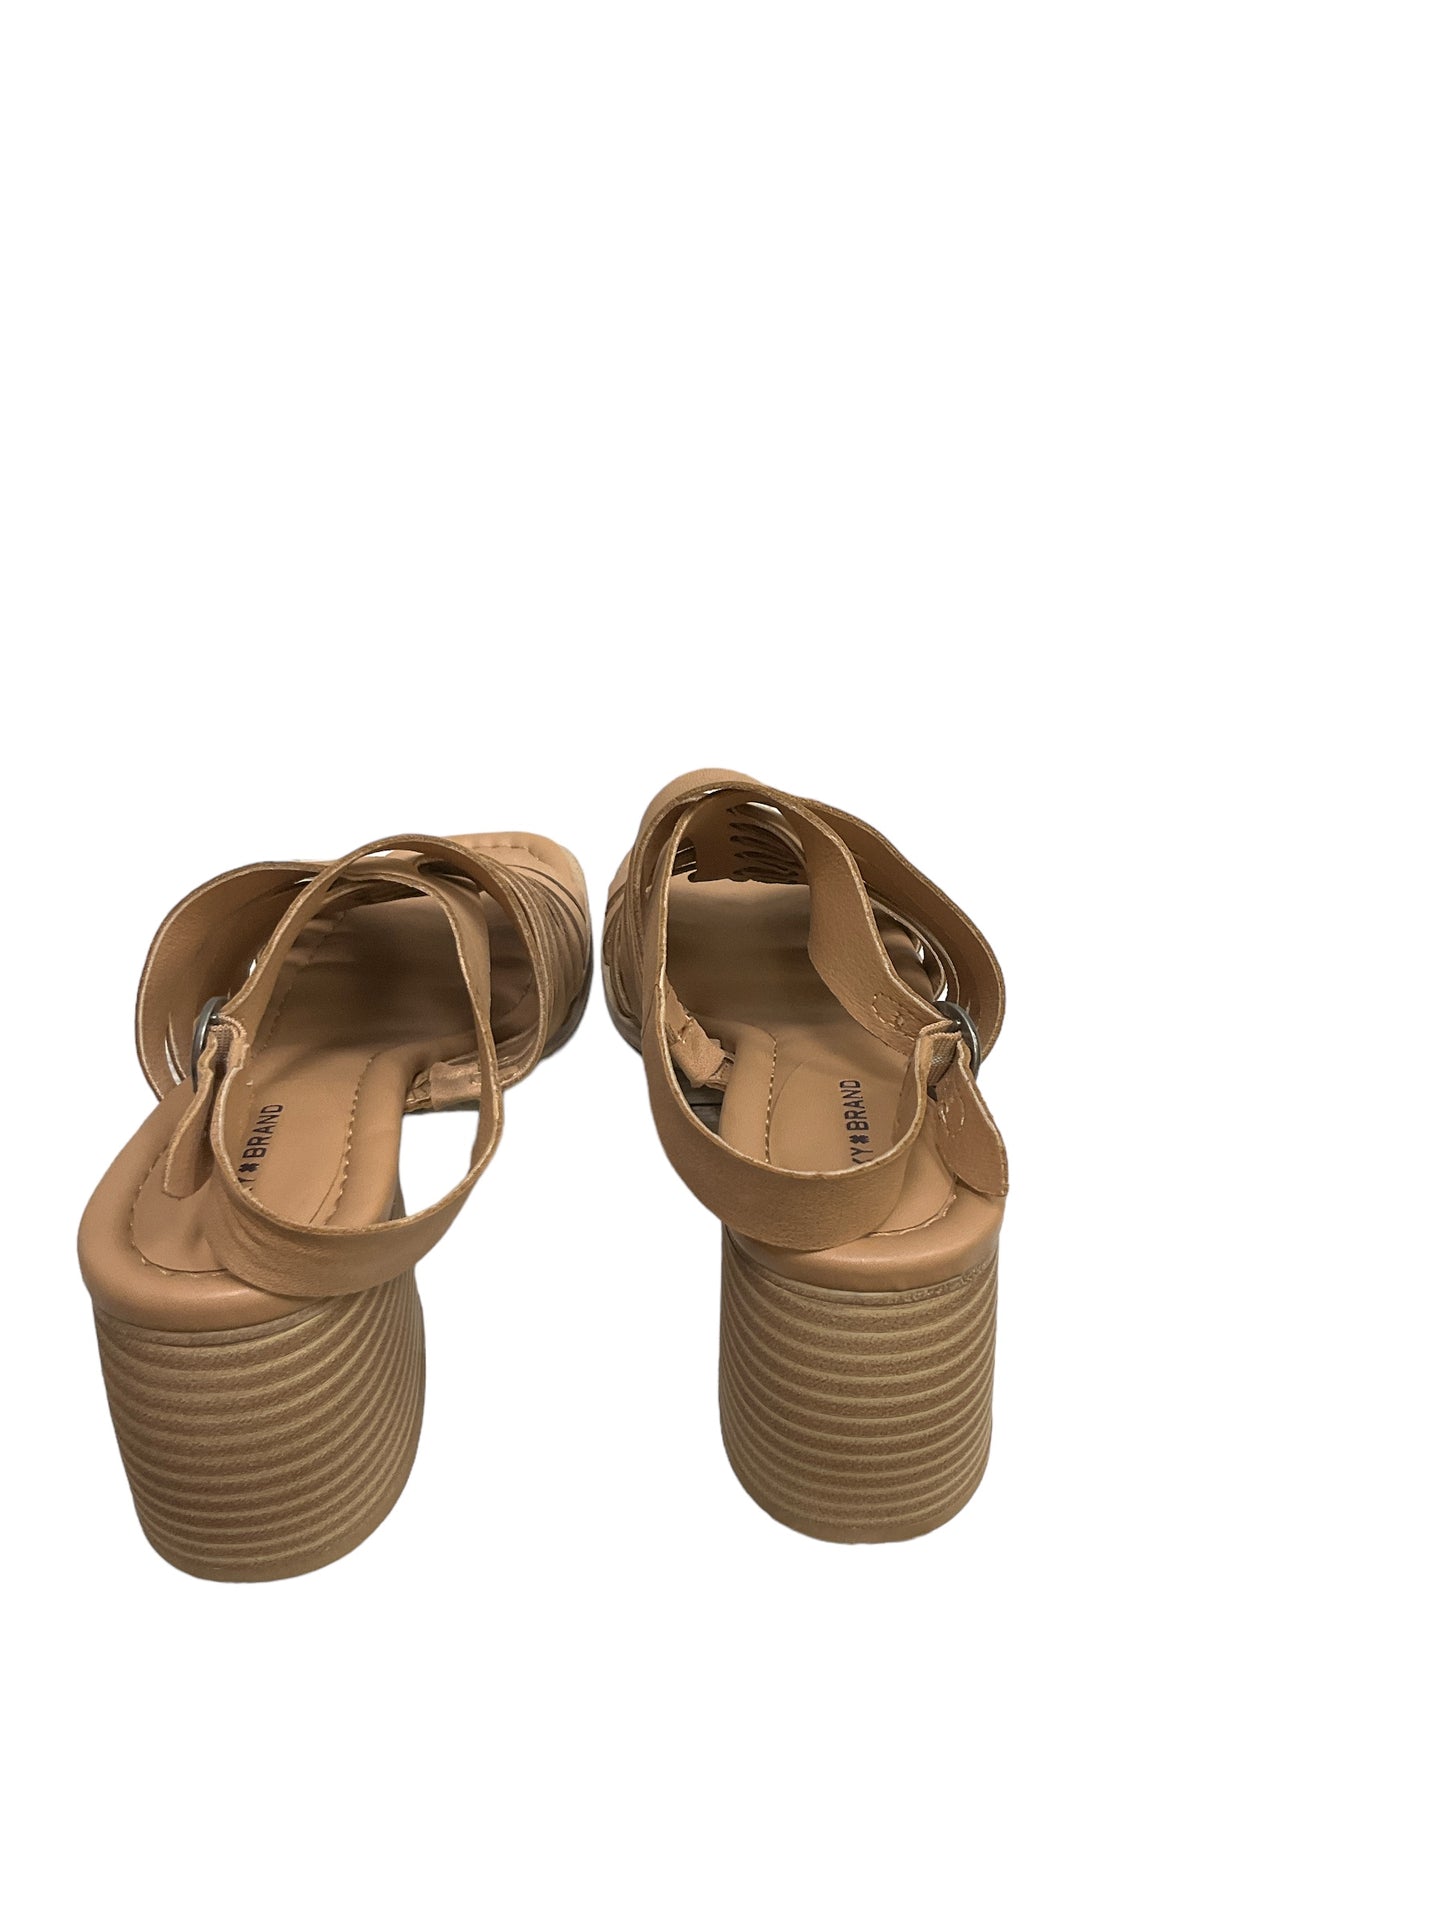 Sandals Heels Block By Lucky Brand  Size: 9.5